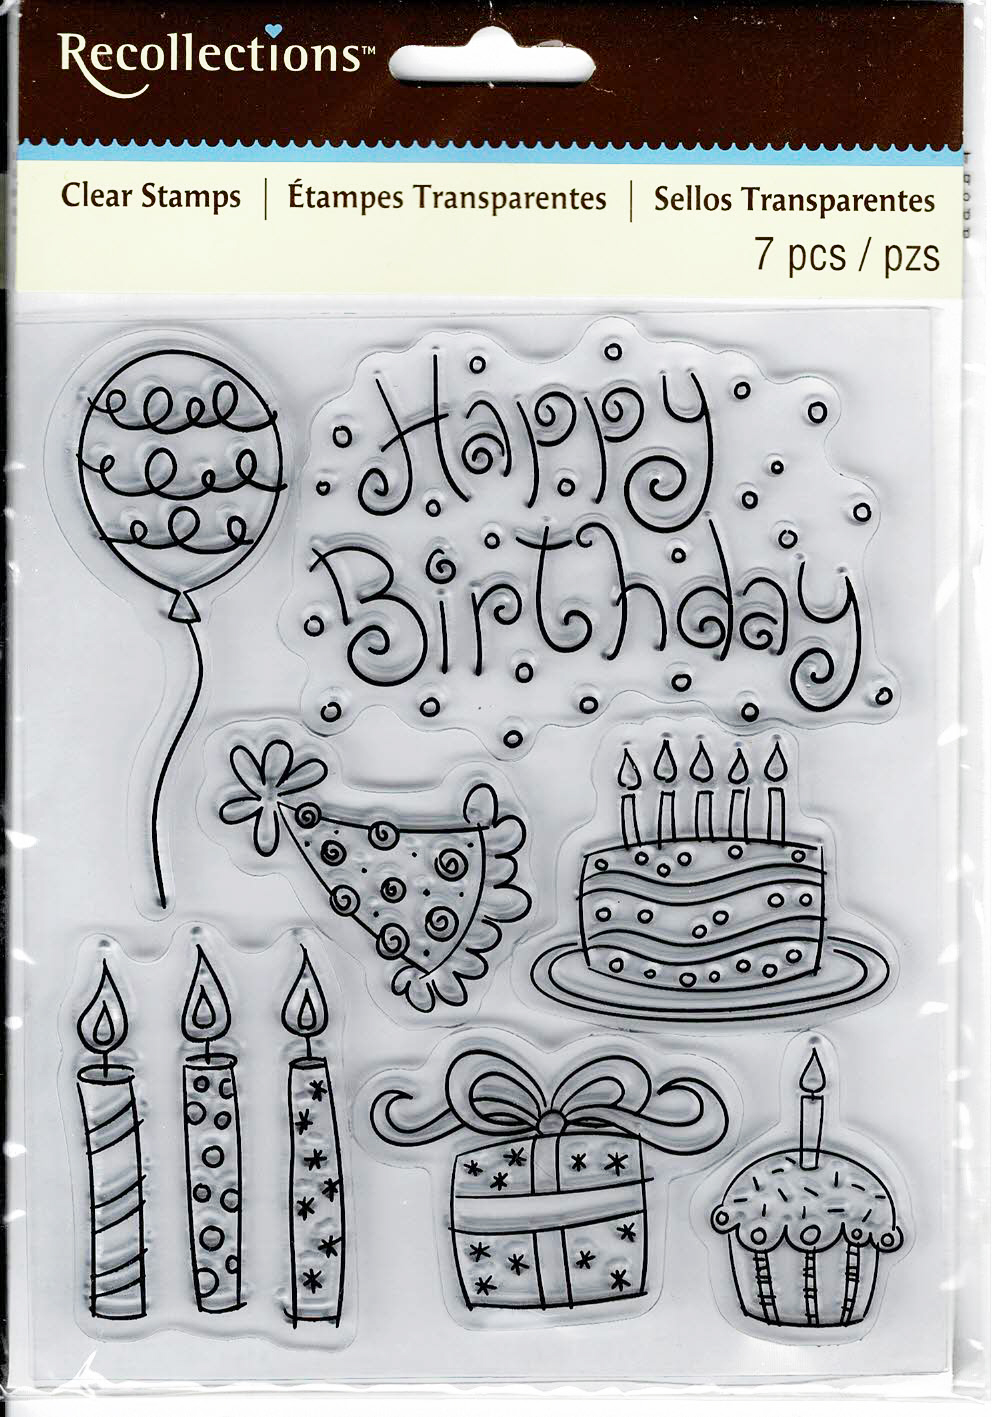 Recollections Clear Stamps 4.75\" x 5.5\" - Doodle Birthday